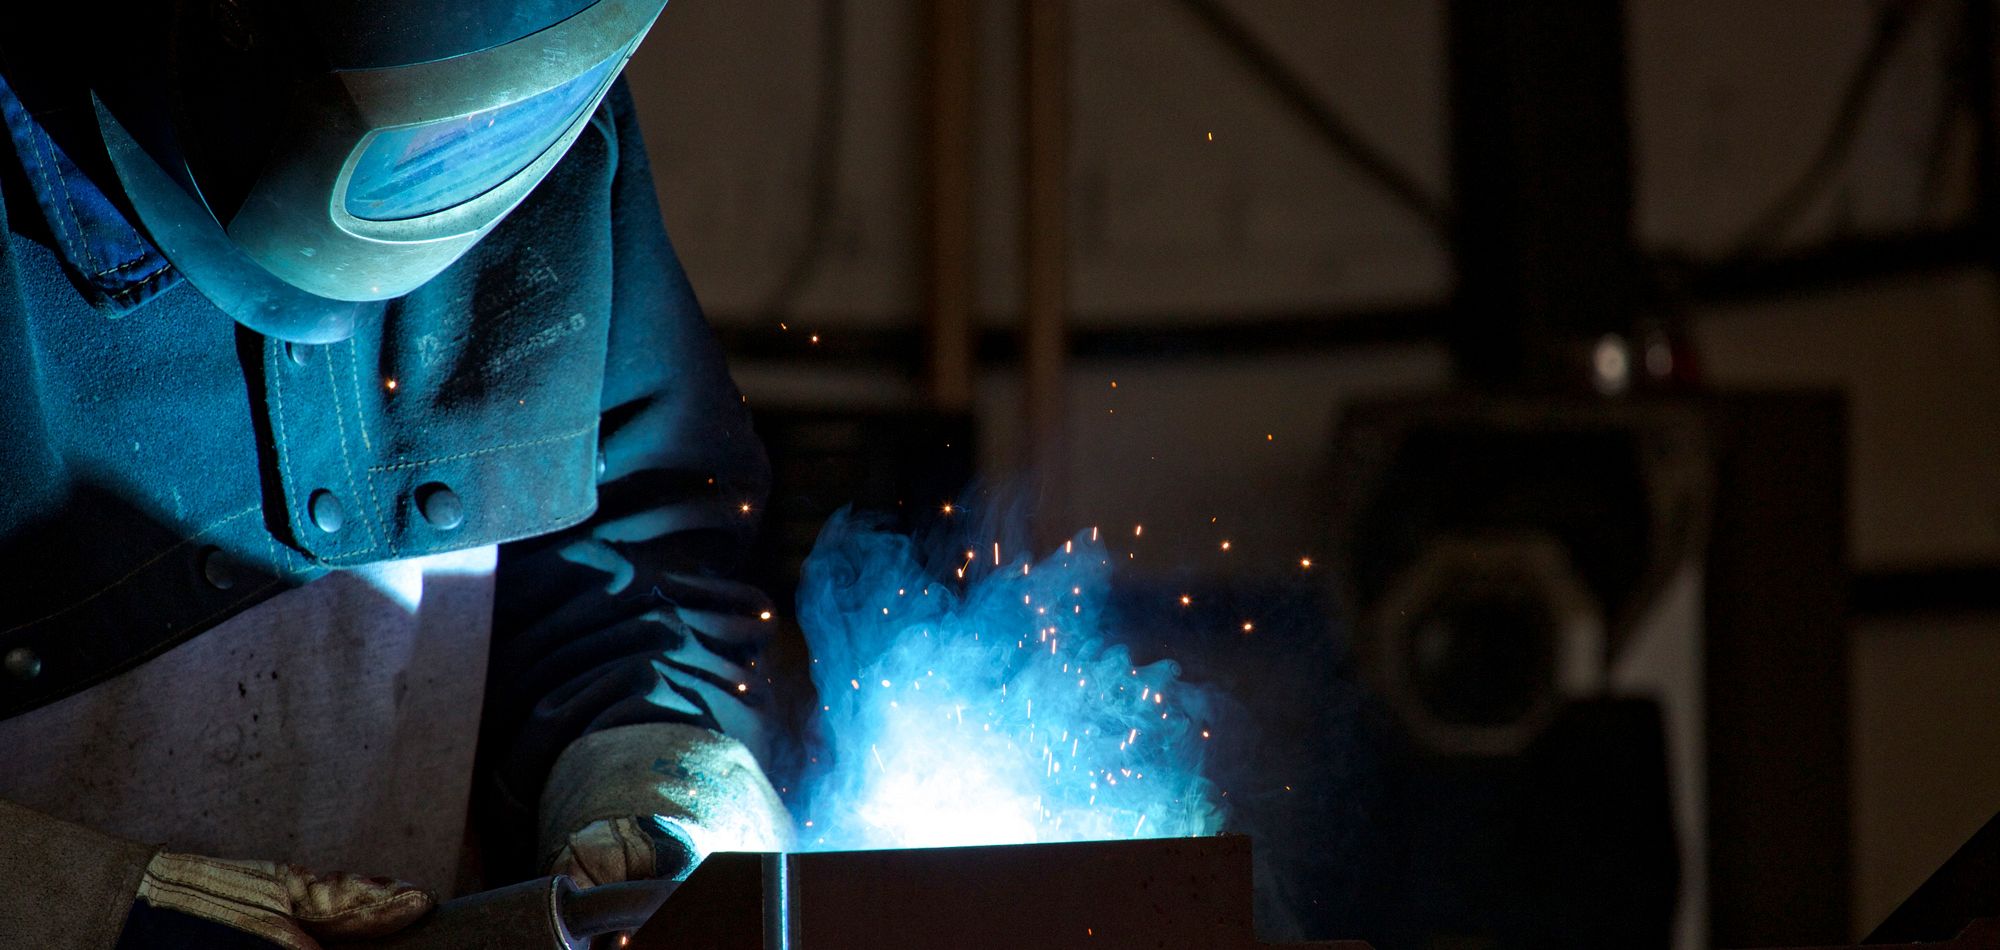 IndustriesNorthside Industries is proud to supply various sectors with a variety of fabrication and services and products that are built to meet and exceed expectations.